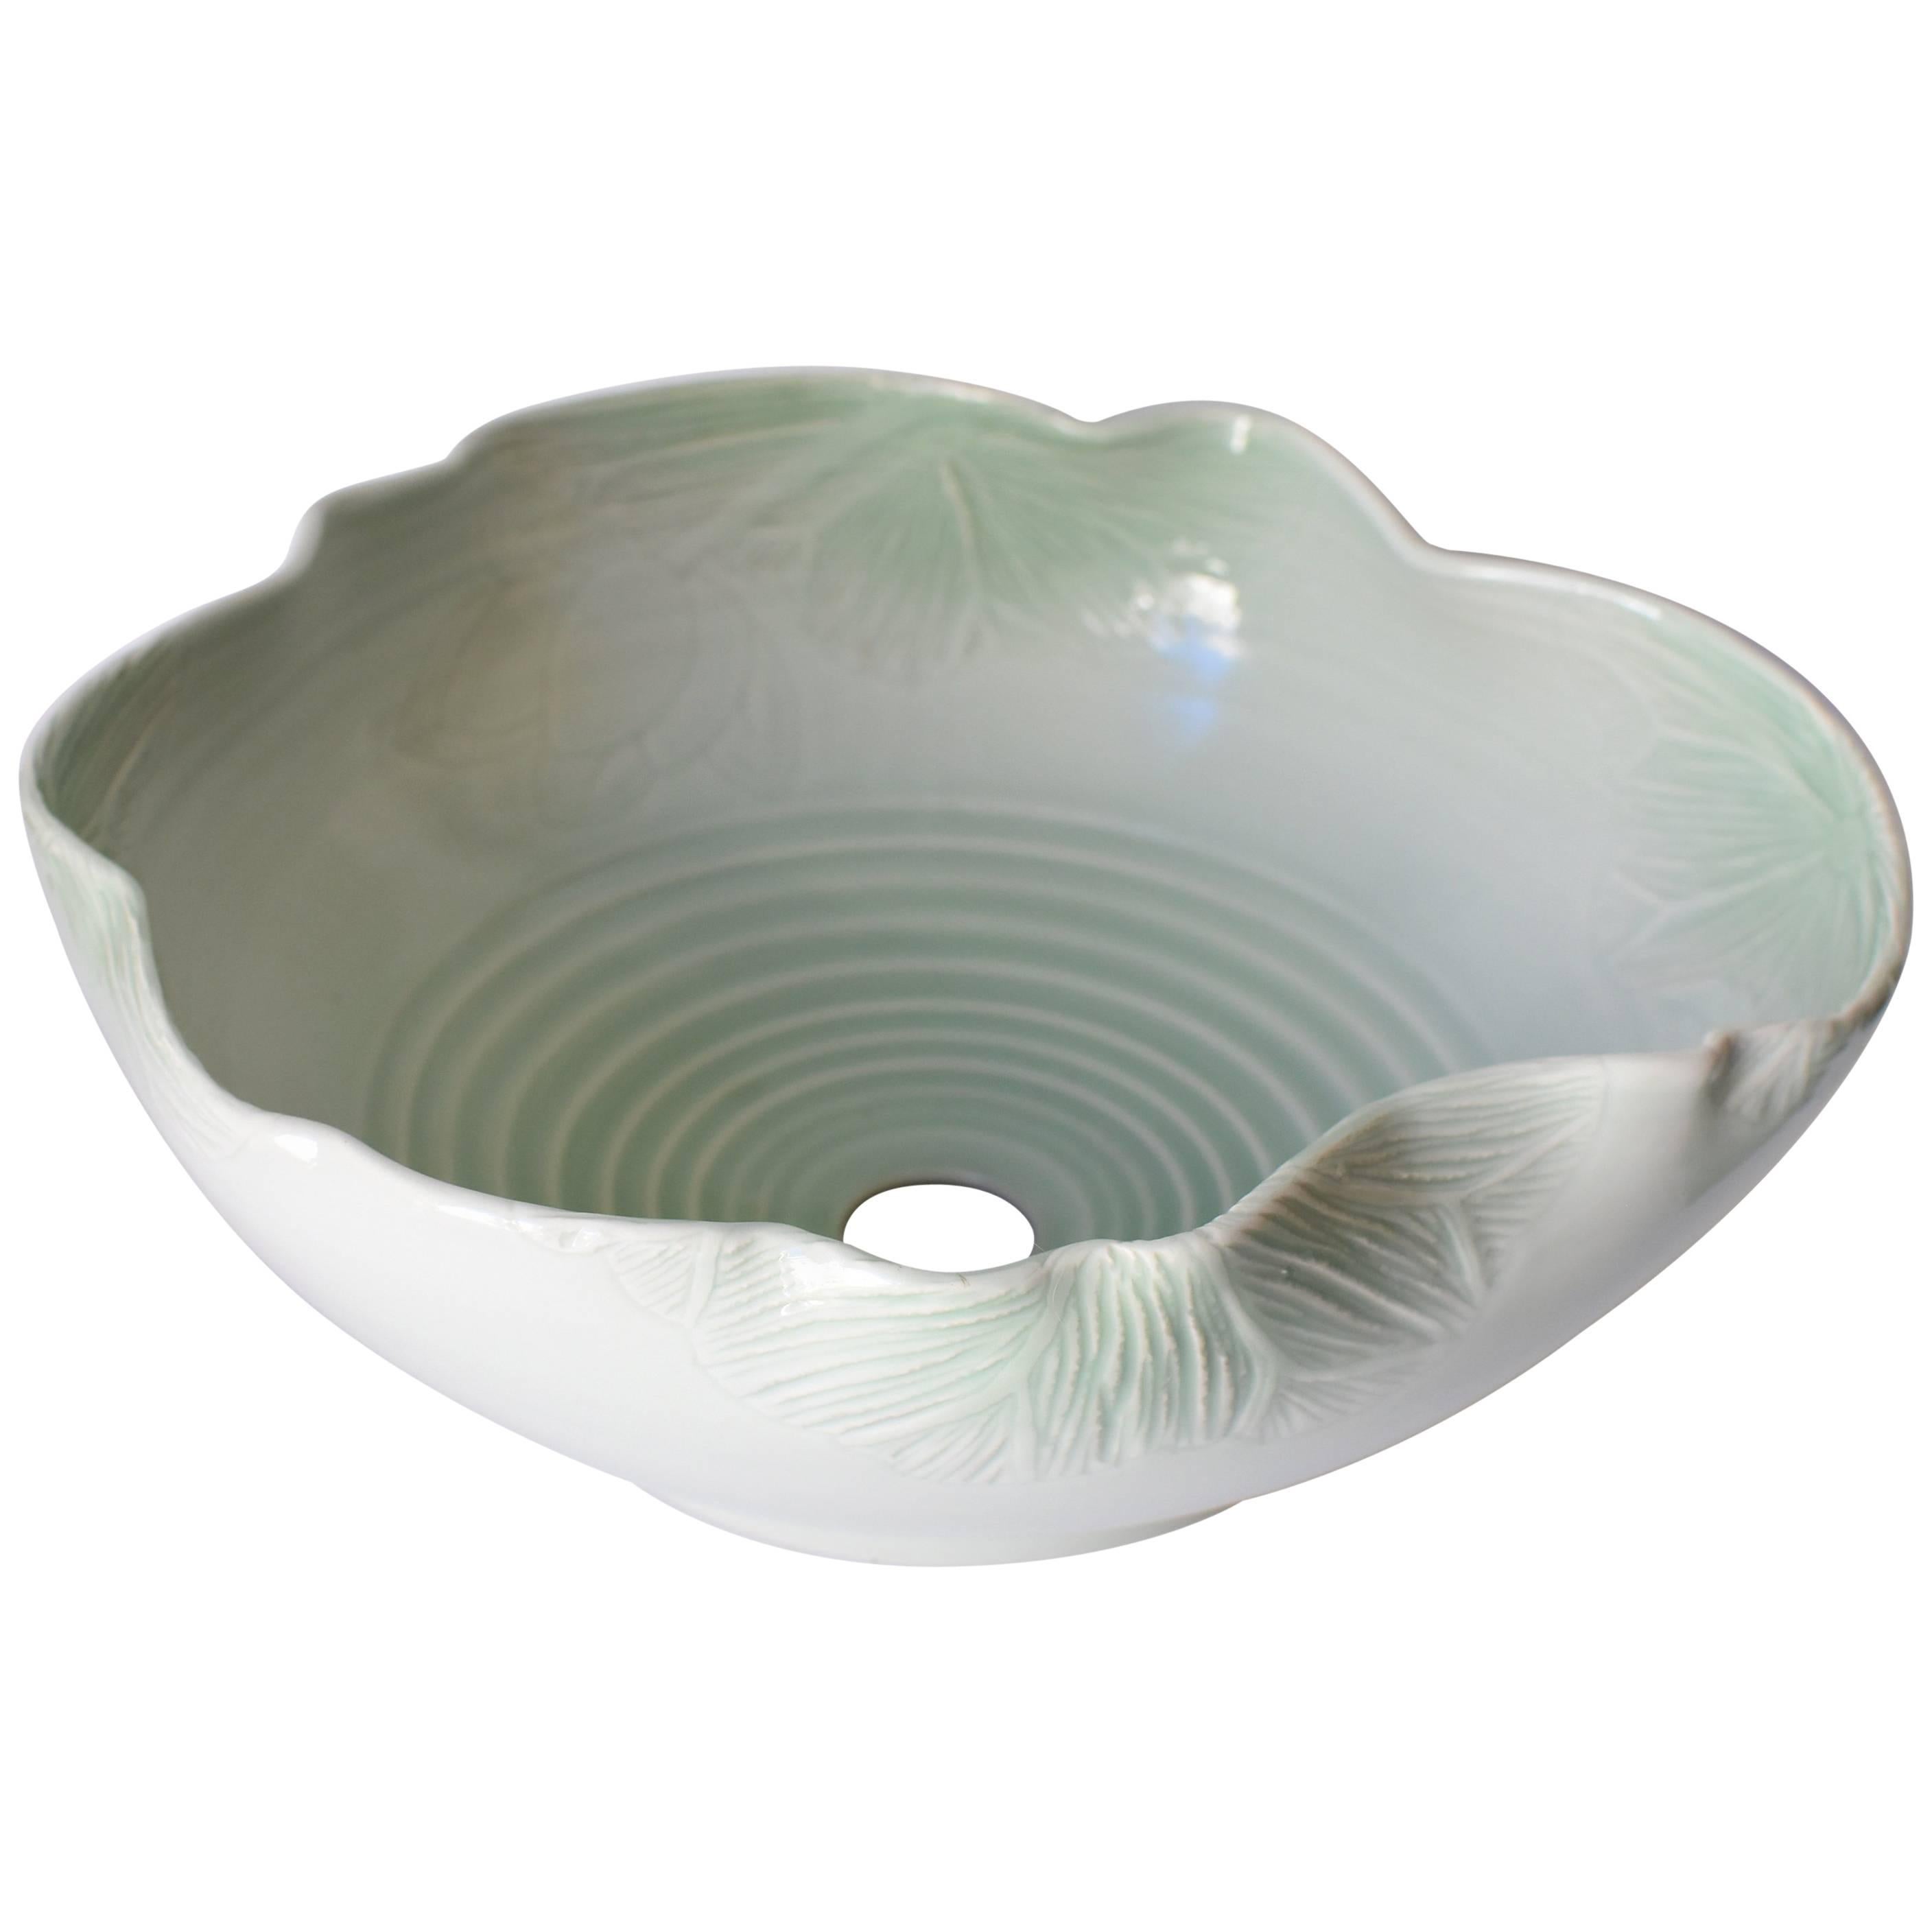 Pale Sage Green Ceramic Sink or Planter Hand-Painted